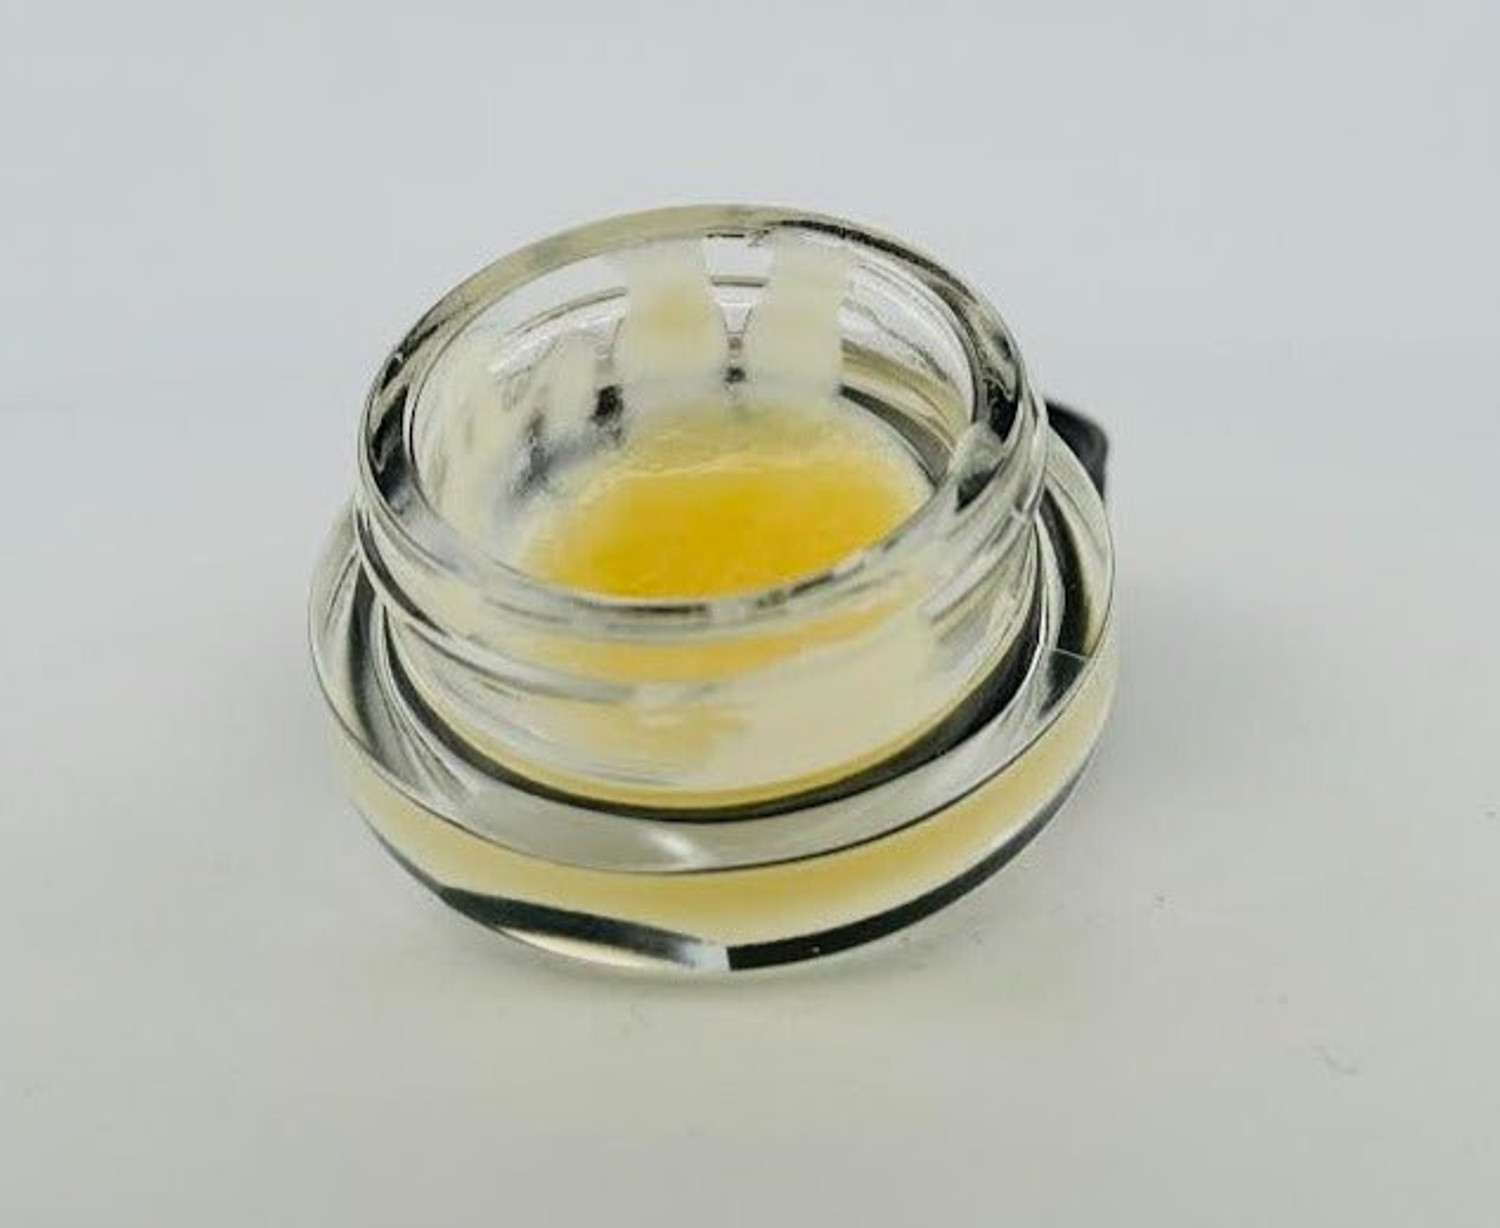 Bearly Legal THCa Live Resin 1g puck - Donnie Burger - CDT